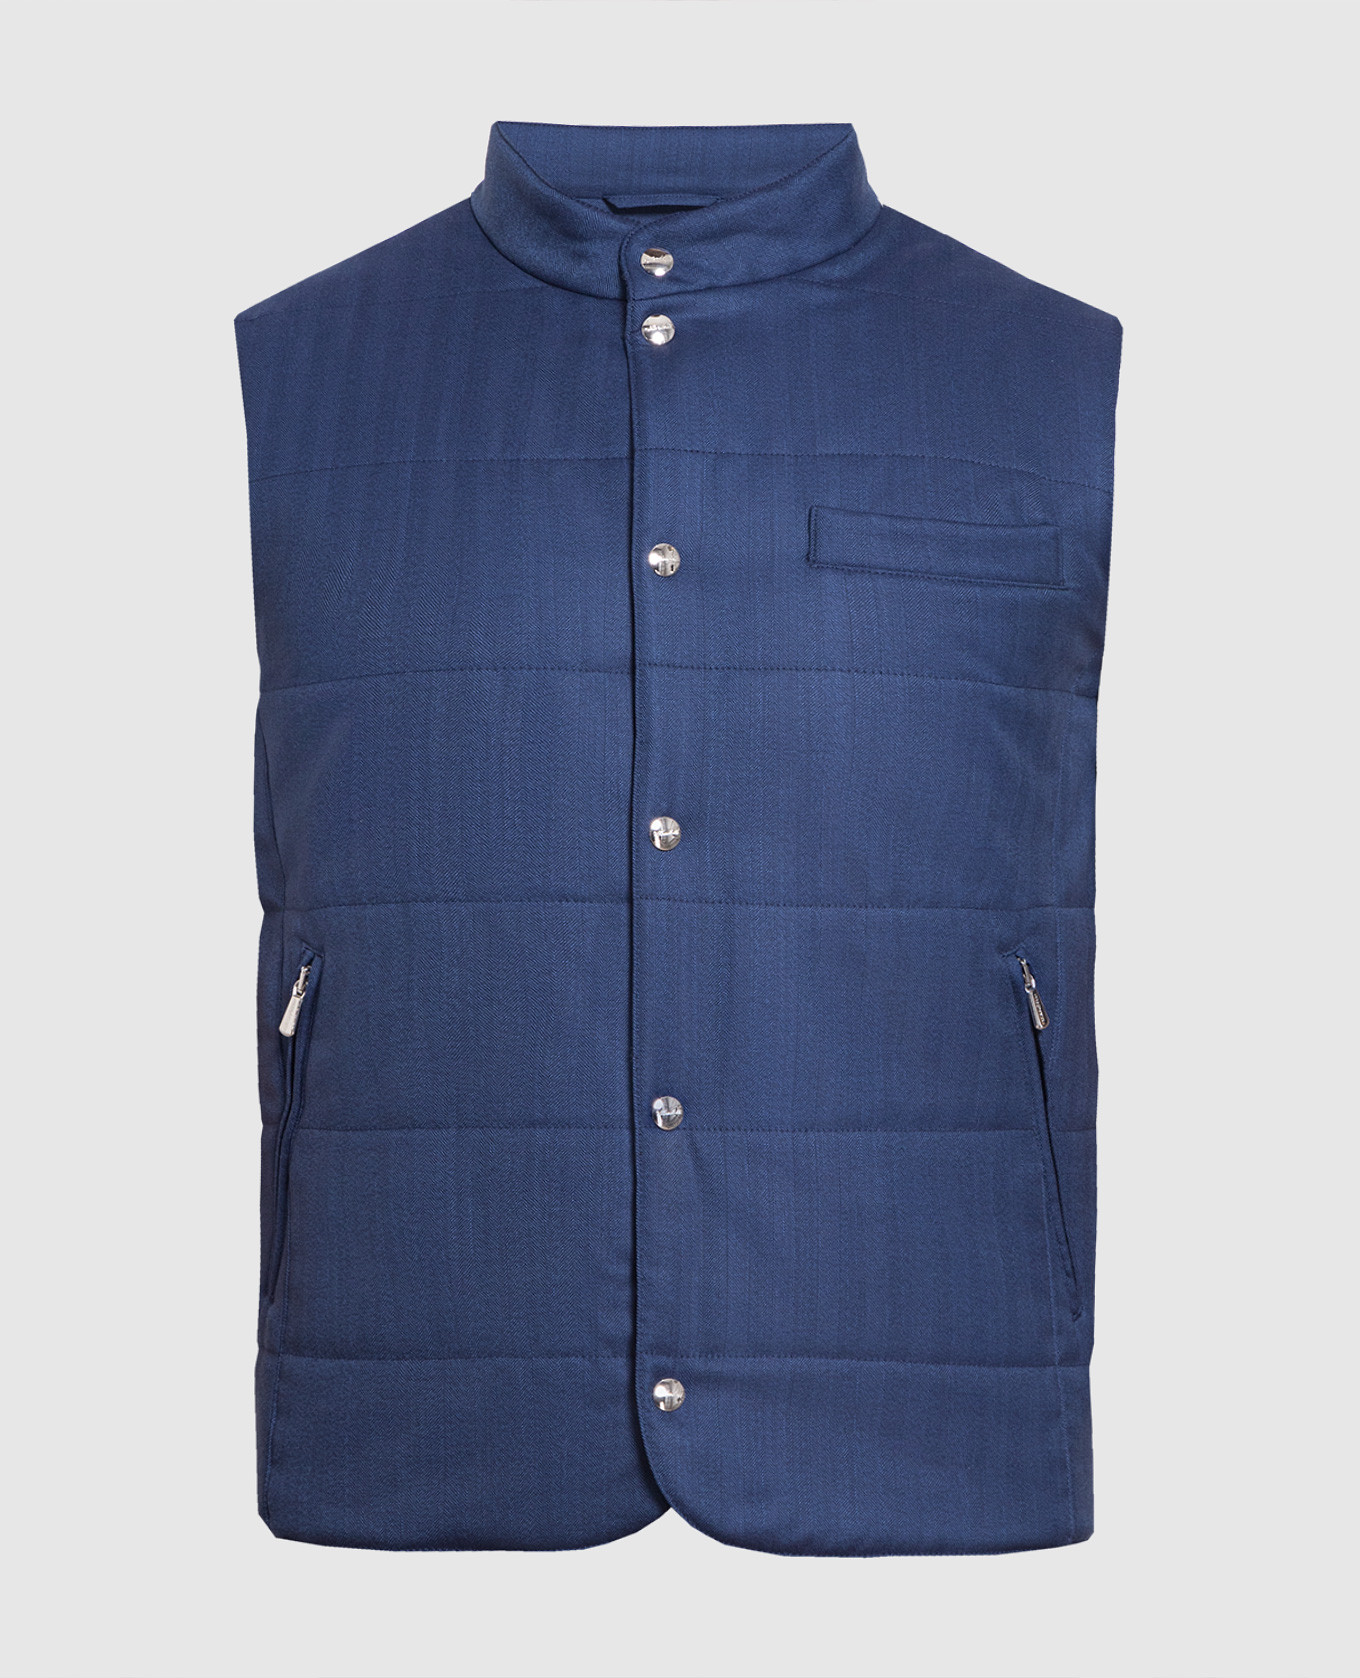 Blue vest made of wool